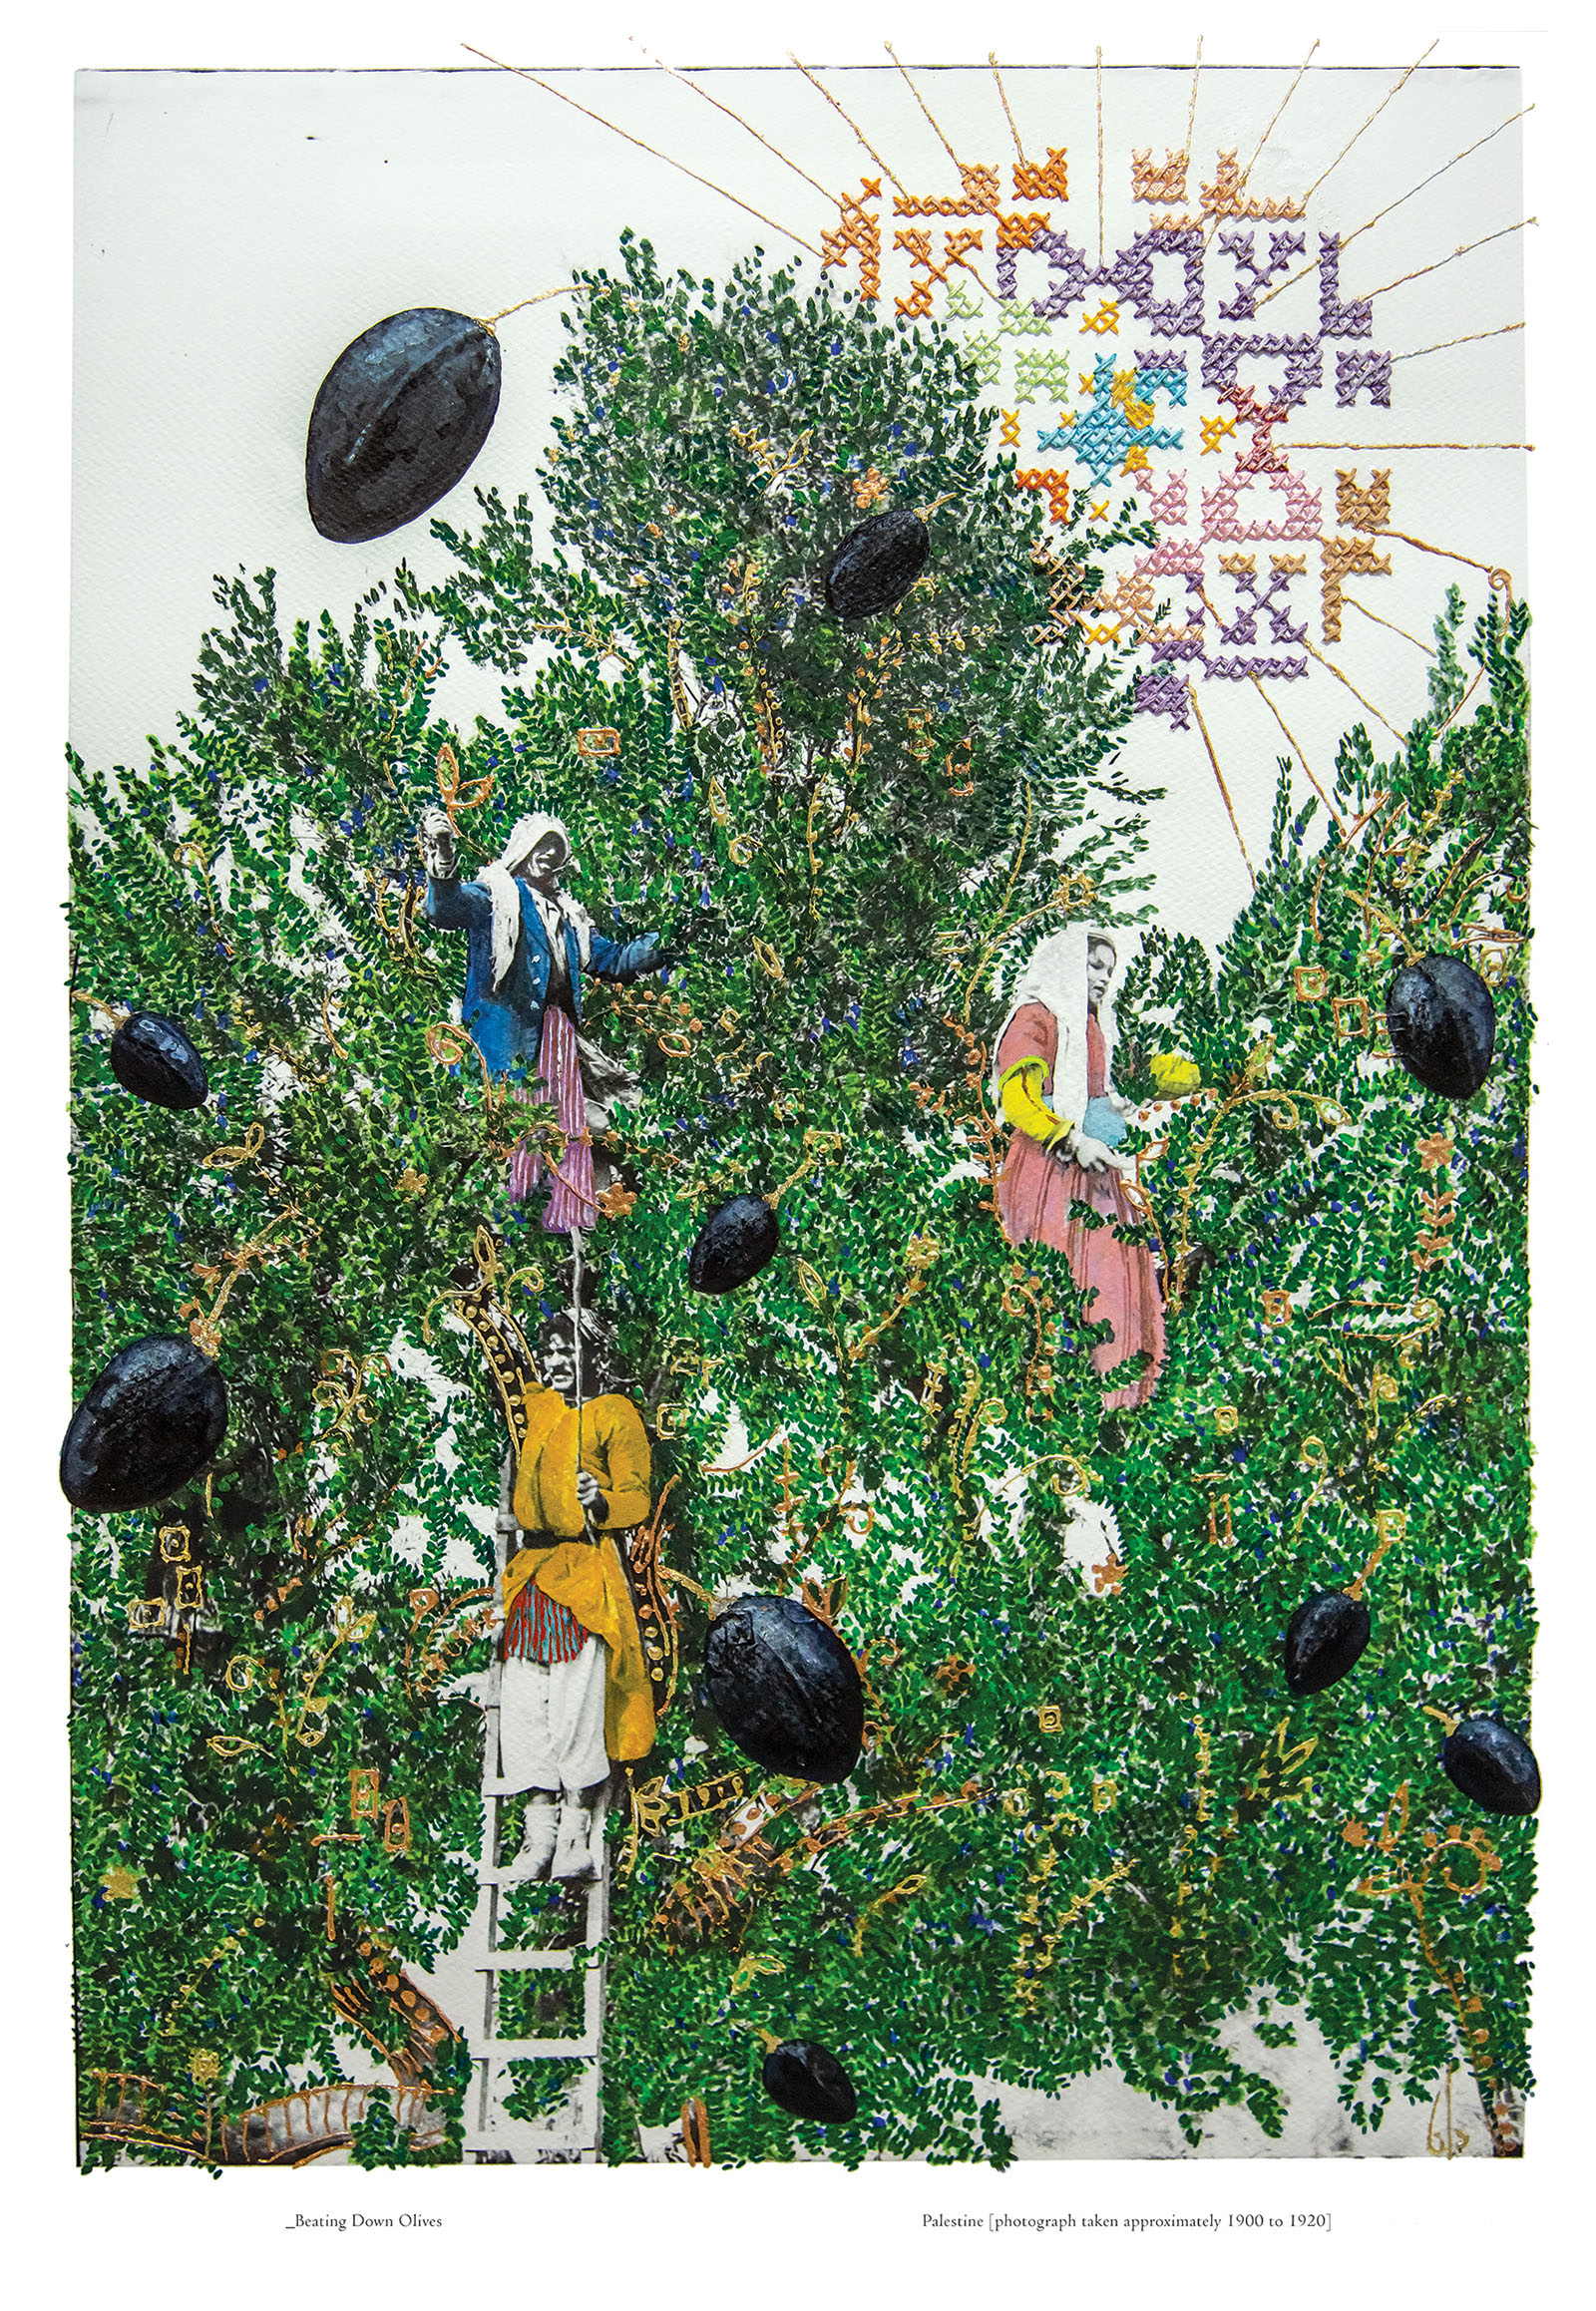 A drawn and tapestried artwork featuring men and women in traditional Palestinian dress harvesting olives in the traditional way, using sticks to beat black olives from the trees. 